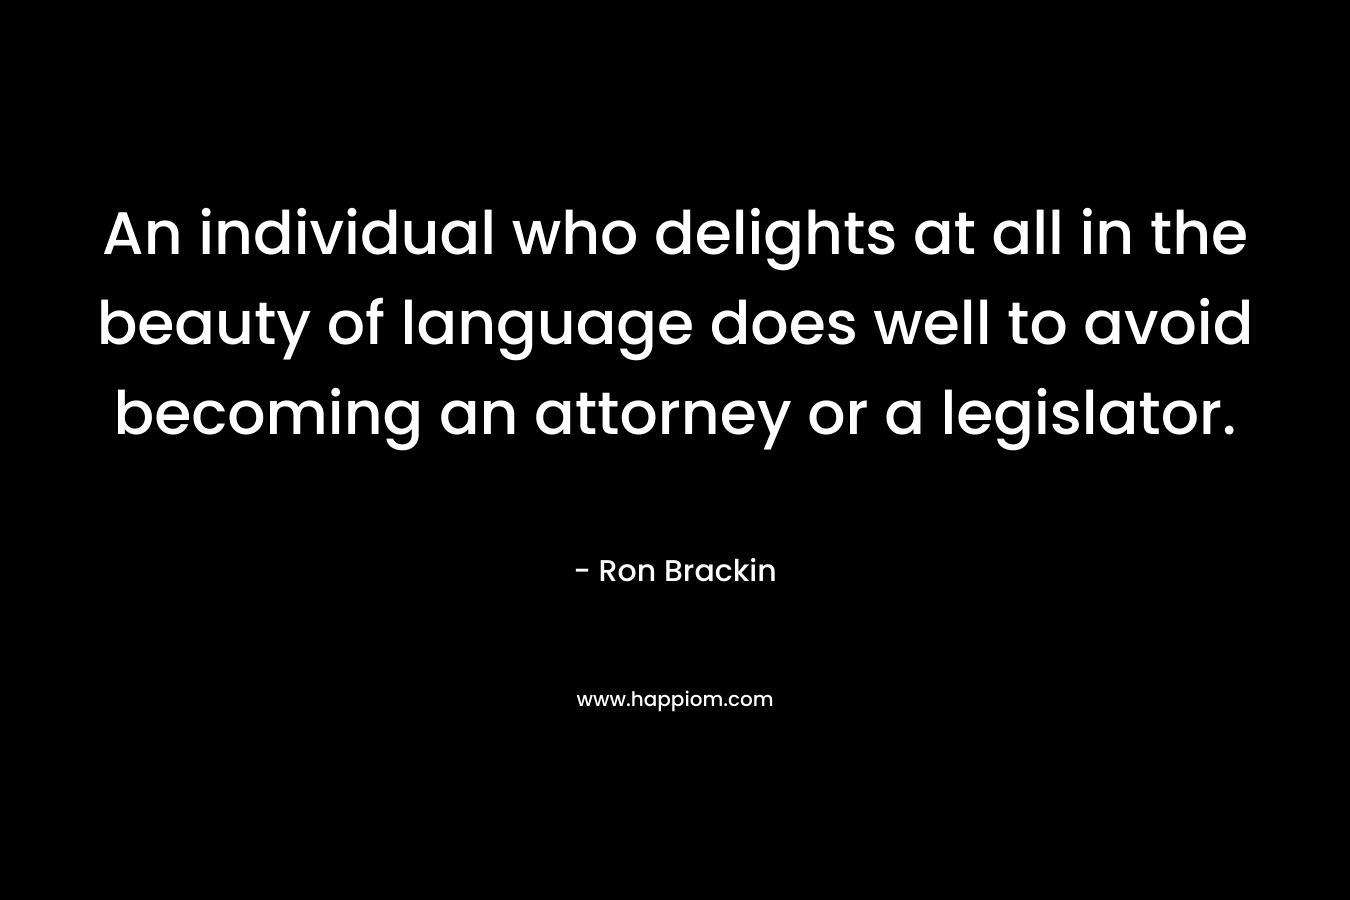 An individual who delights at all in the beauty of language does well to avoid becoming an attorney or a legislator.